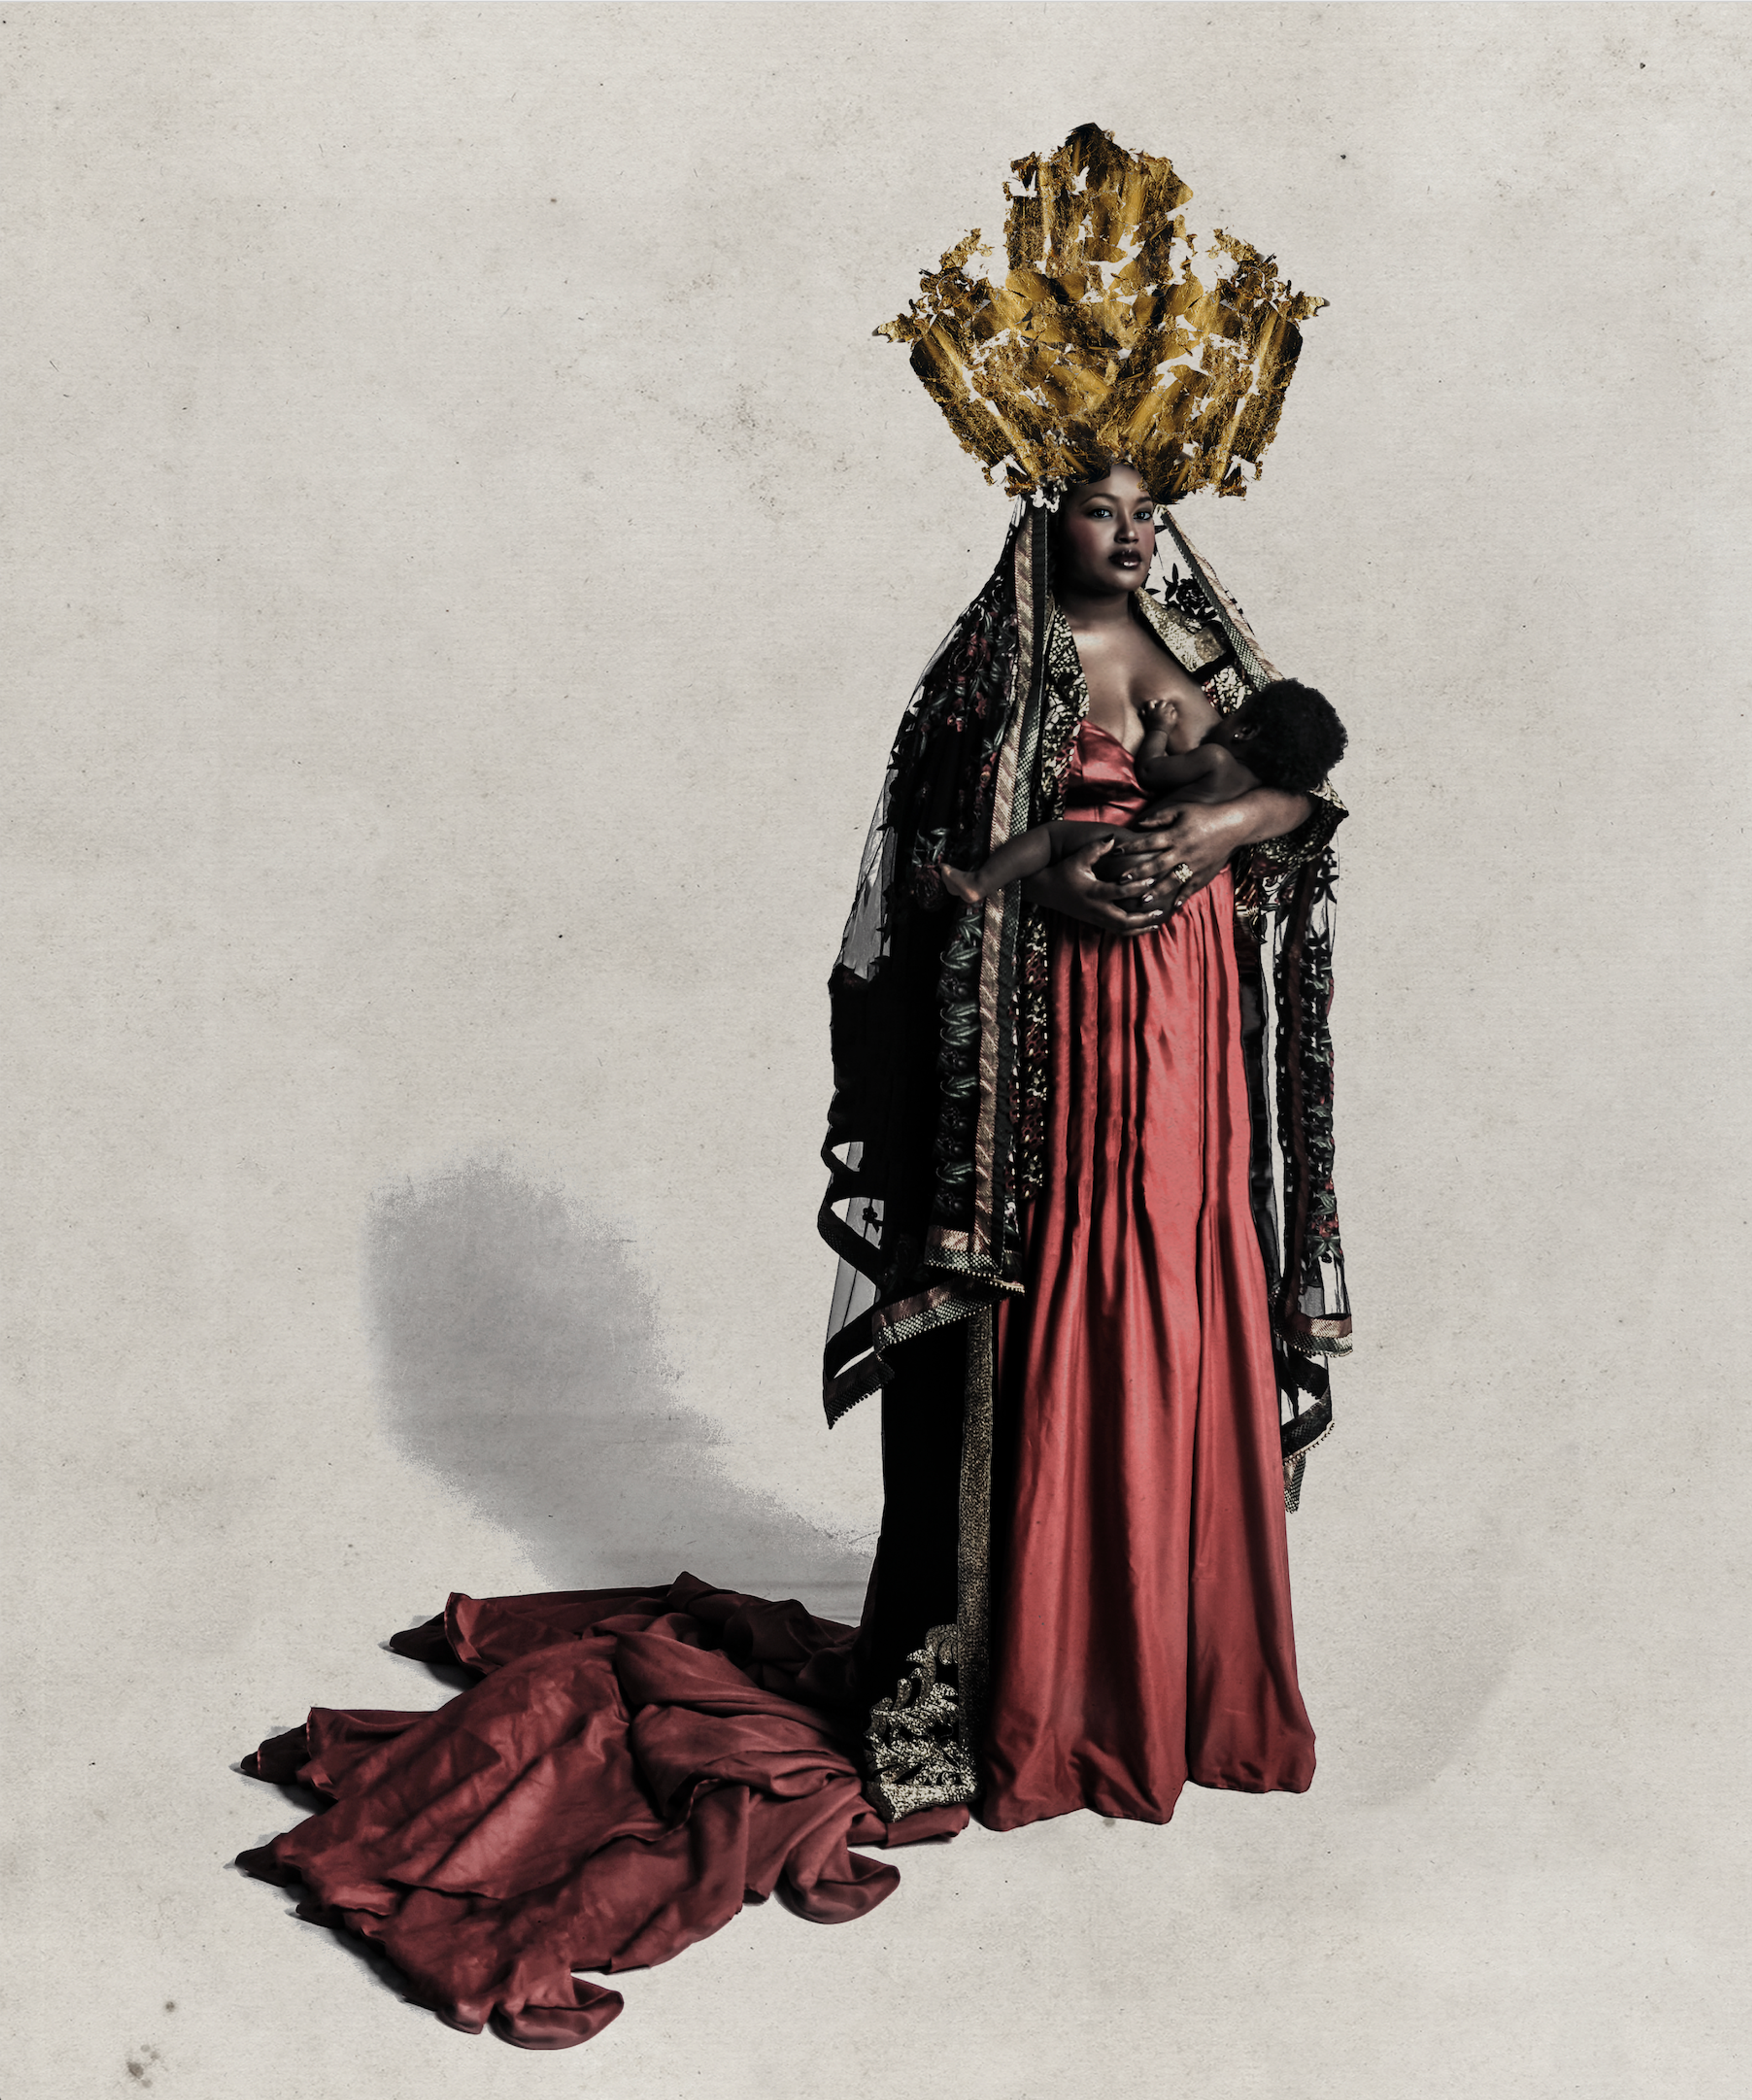 A woman wearing an ornate headdress and red dress holding a child